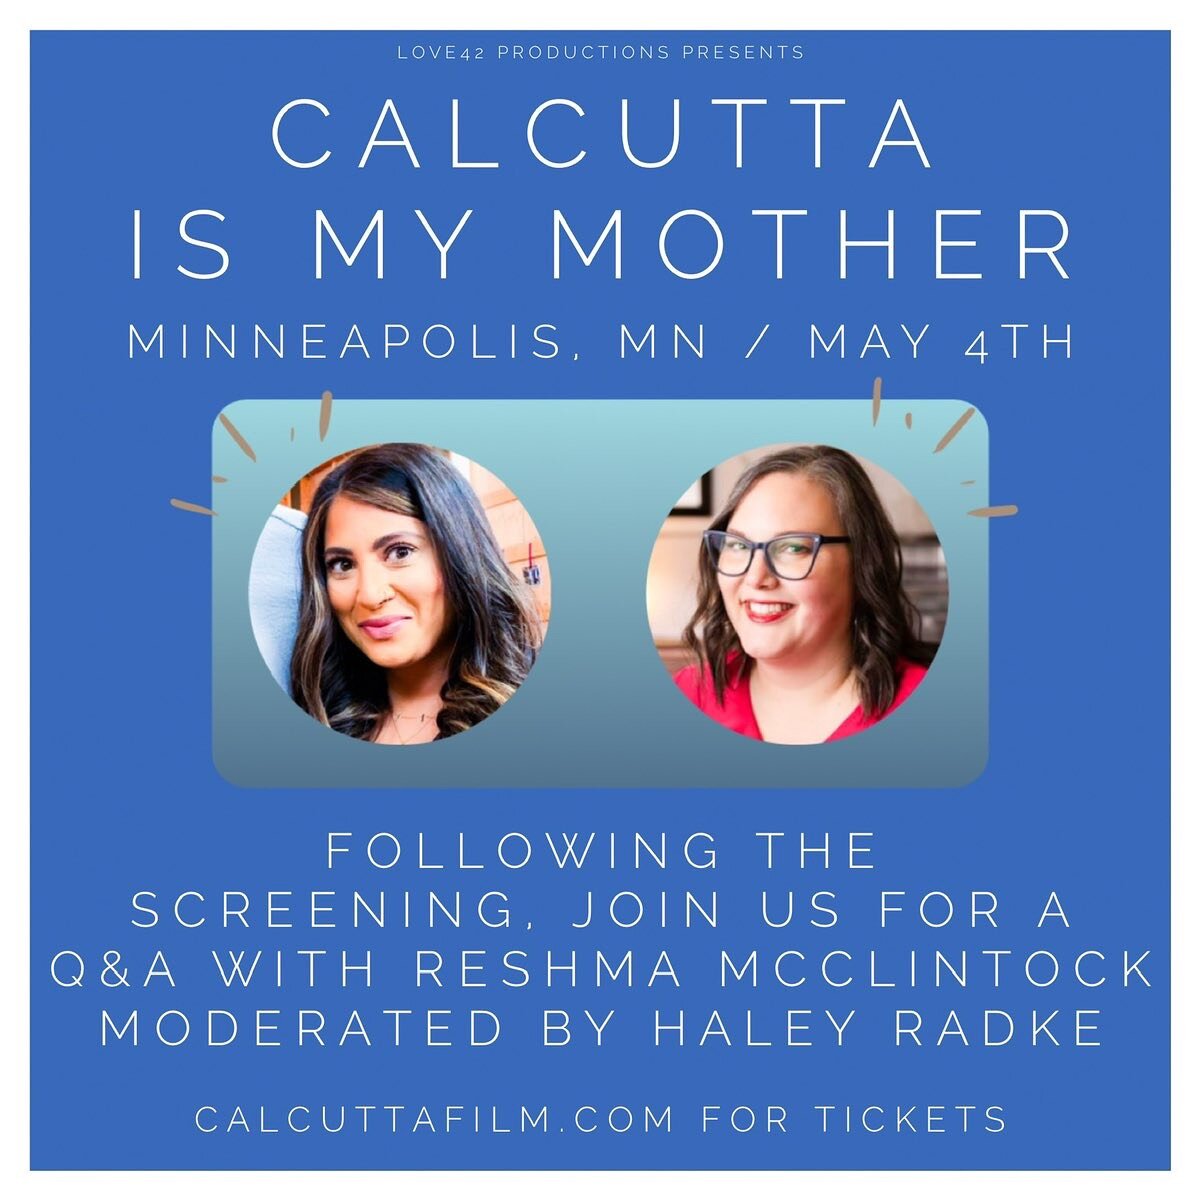 Haley is so thrilled to be able to Host and Moderate the Q&amp;A for Calcutta is My Mother. She would love to meet you in Minneapolis! 

This is worth making a weekend trip to join us! ✈️ 🎟️ 

Repost from @calcuttaismymother 

The Q&amp;A with Subje